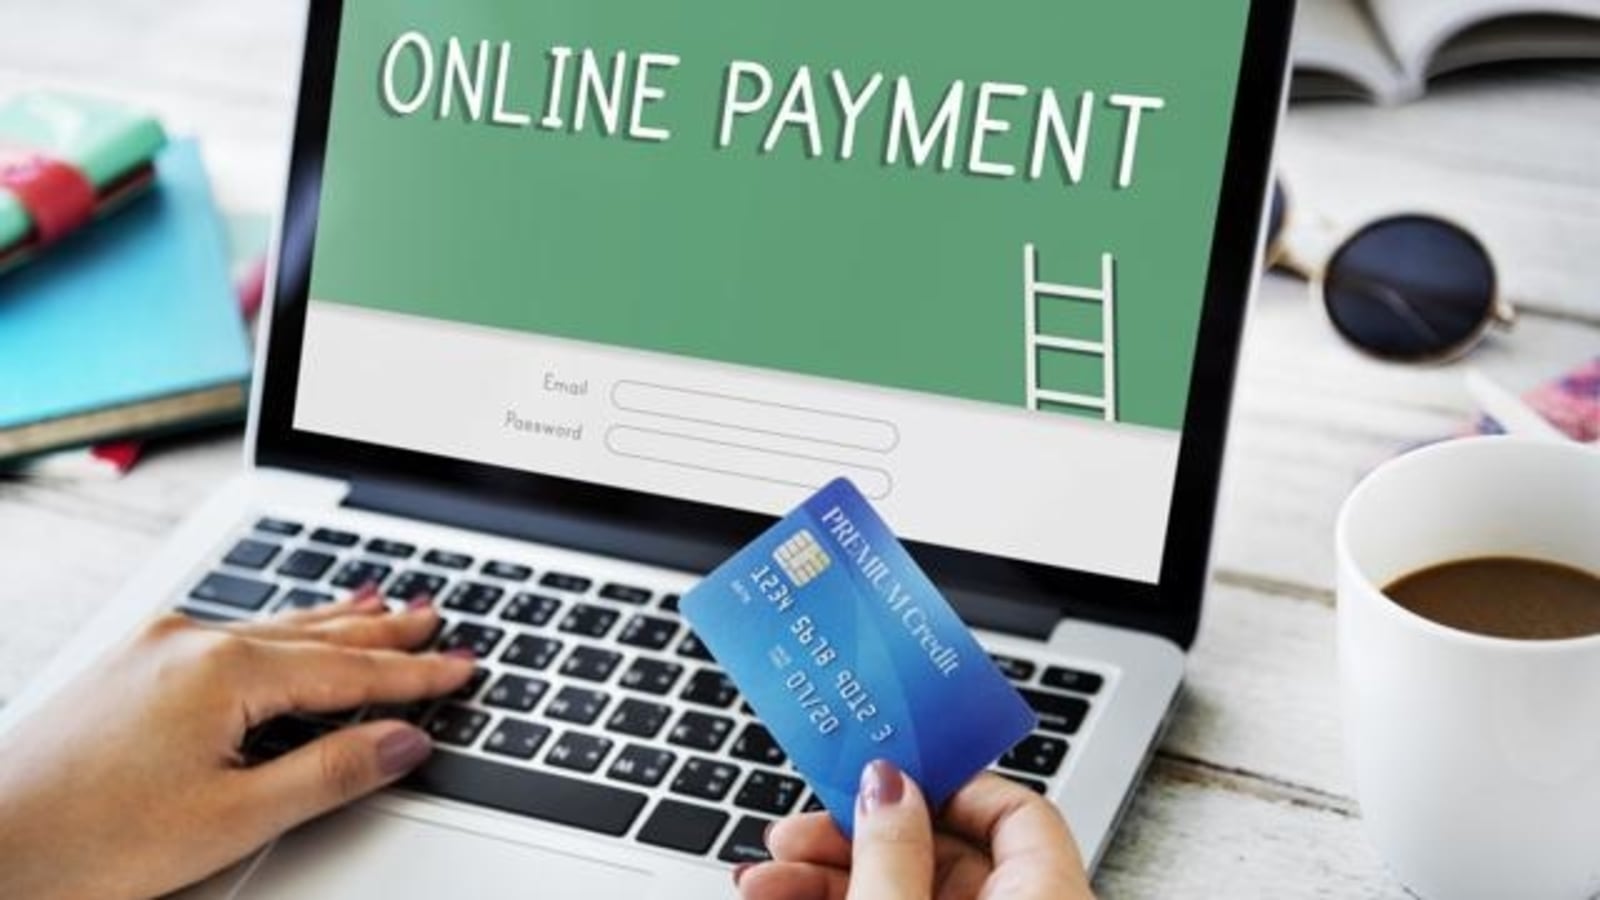 Online payment rules set to change from Jan 1. All you need to know -  Hindustan Times